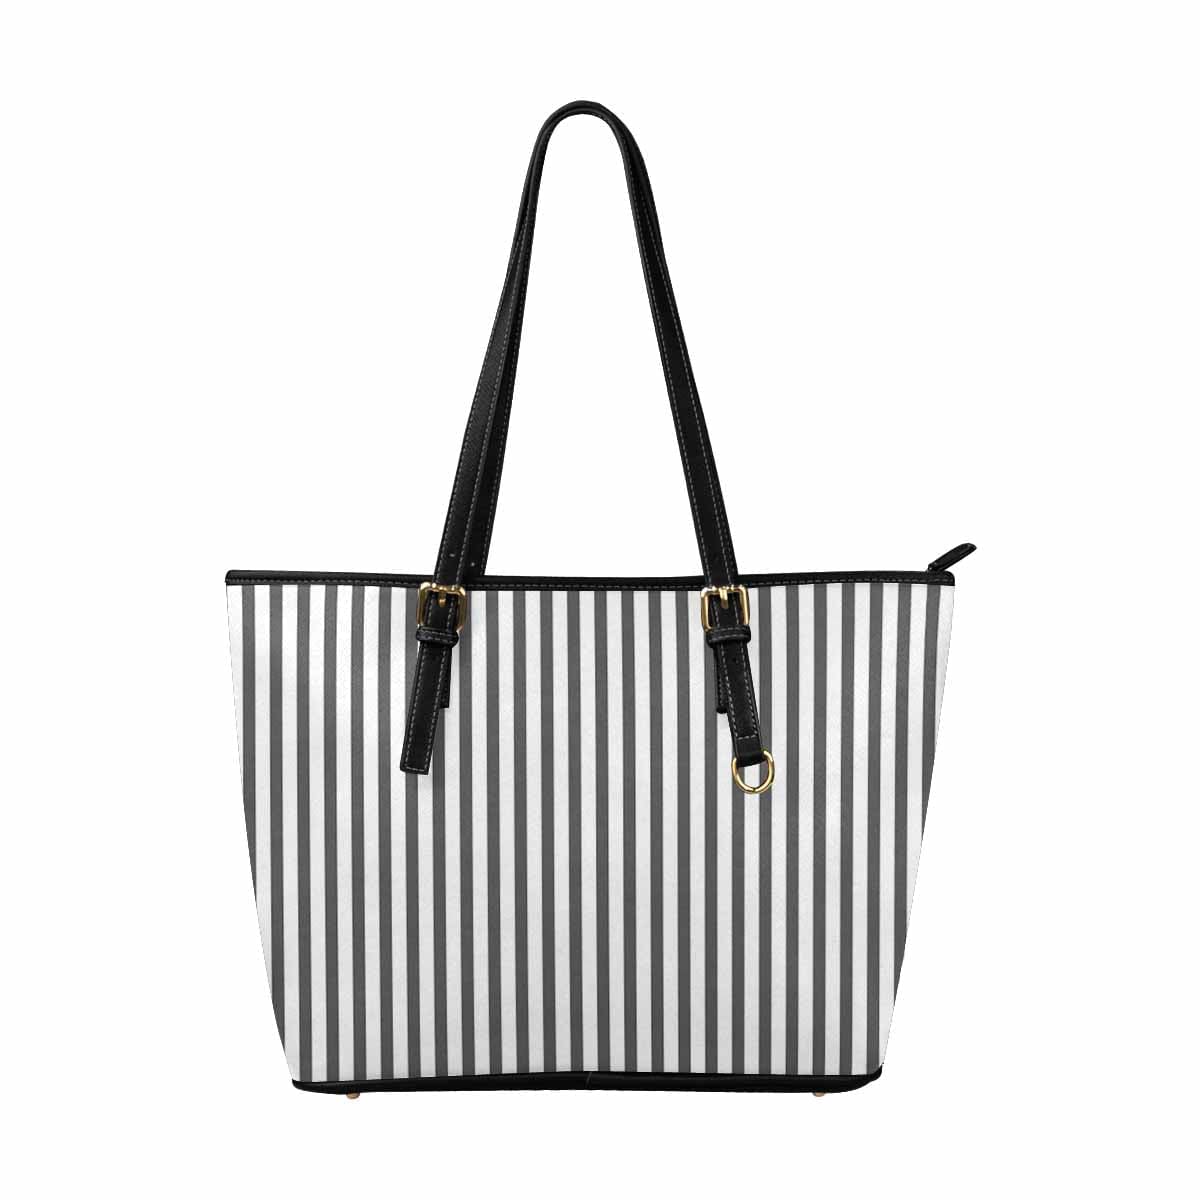 Large Leather Tote Shoulder Bag - Stripe Grey Tote - Bags | Leather Tote Bags